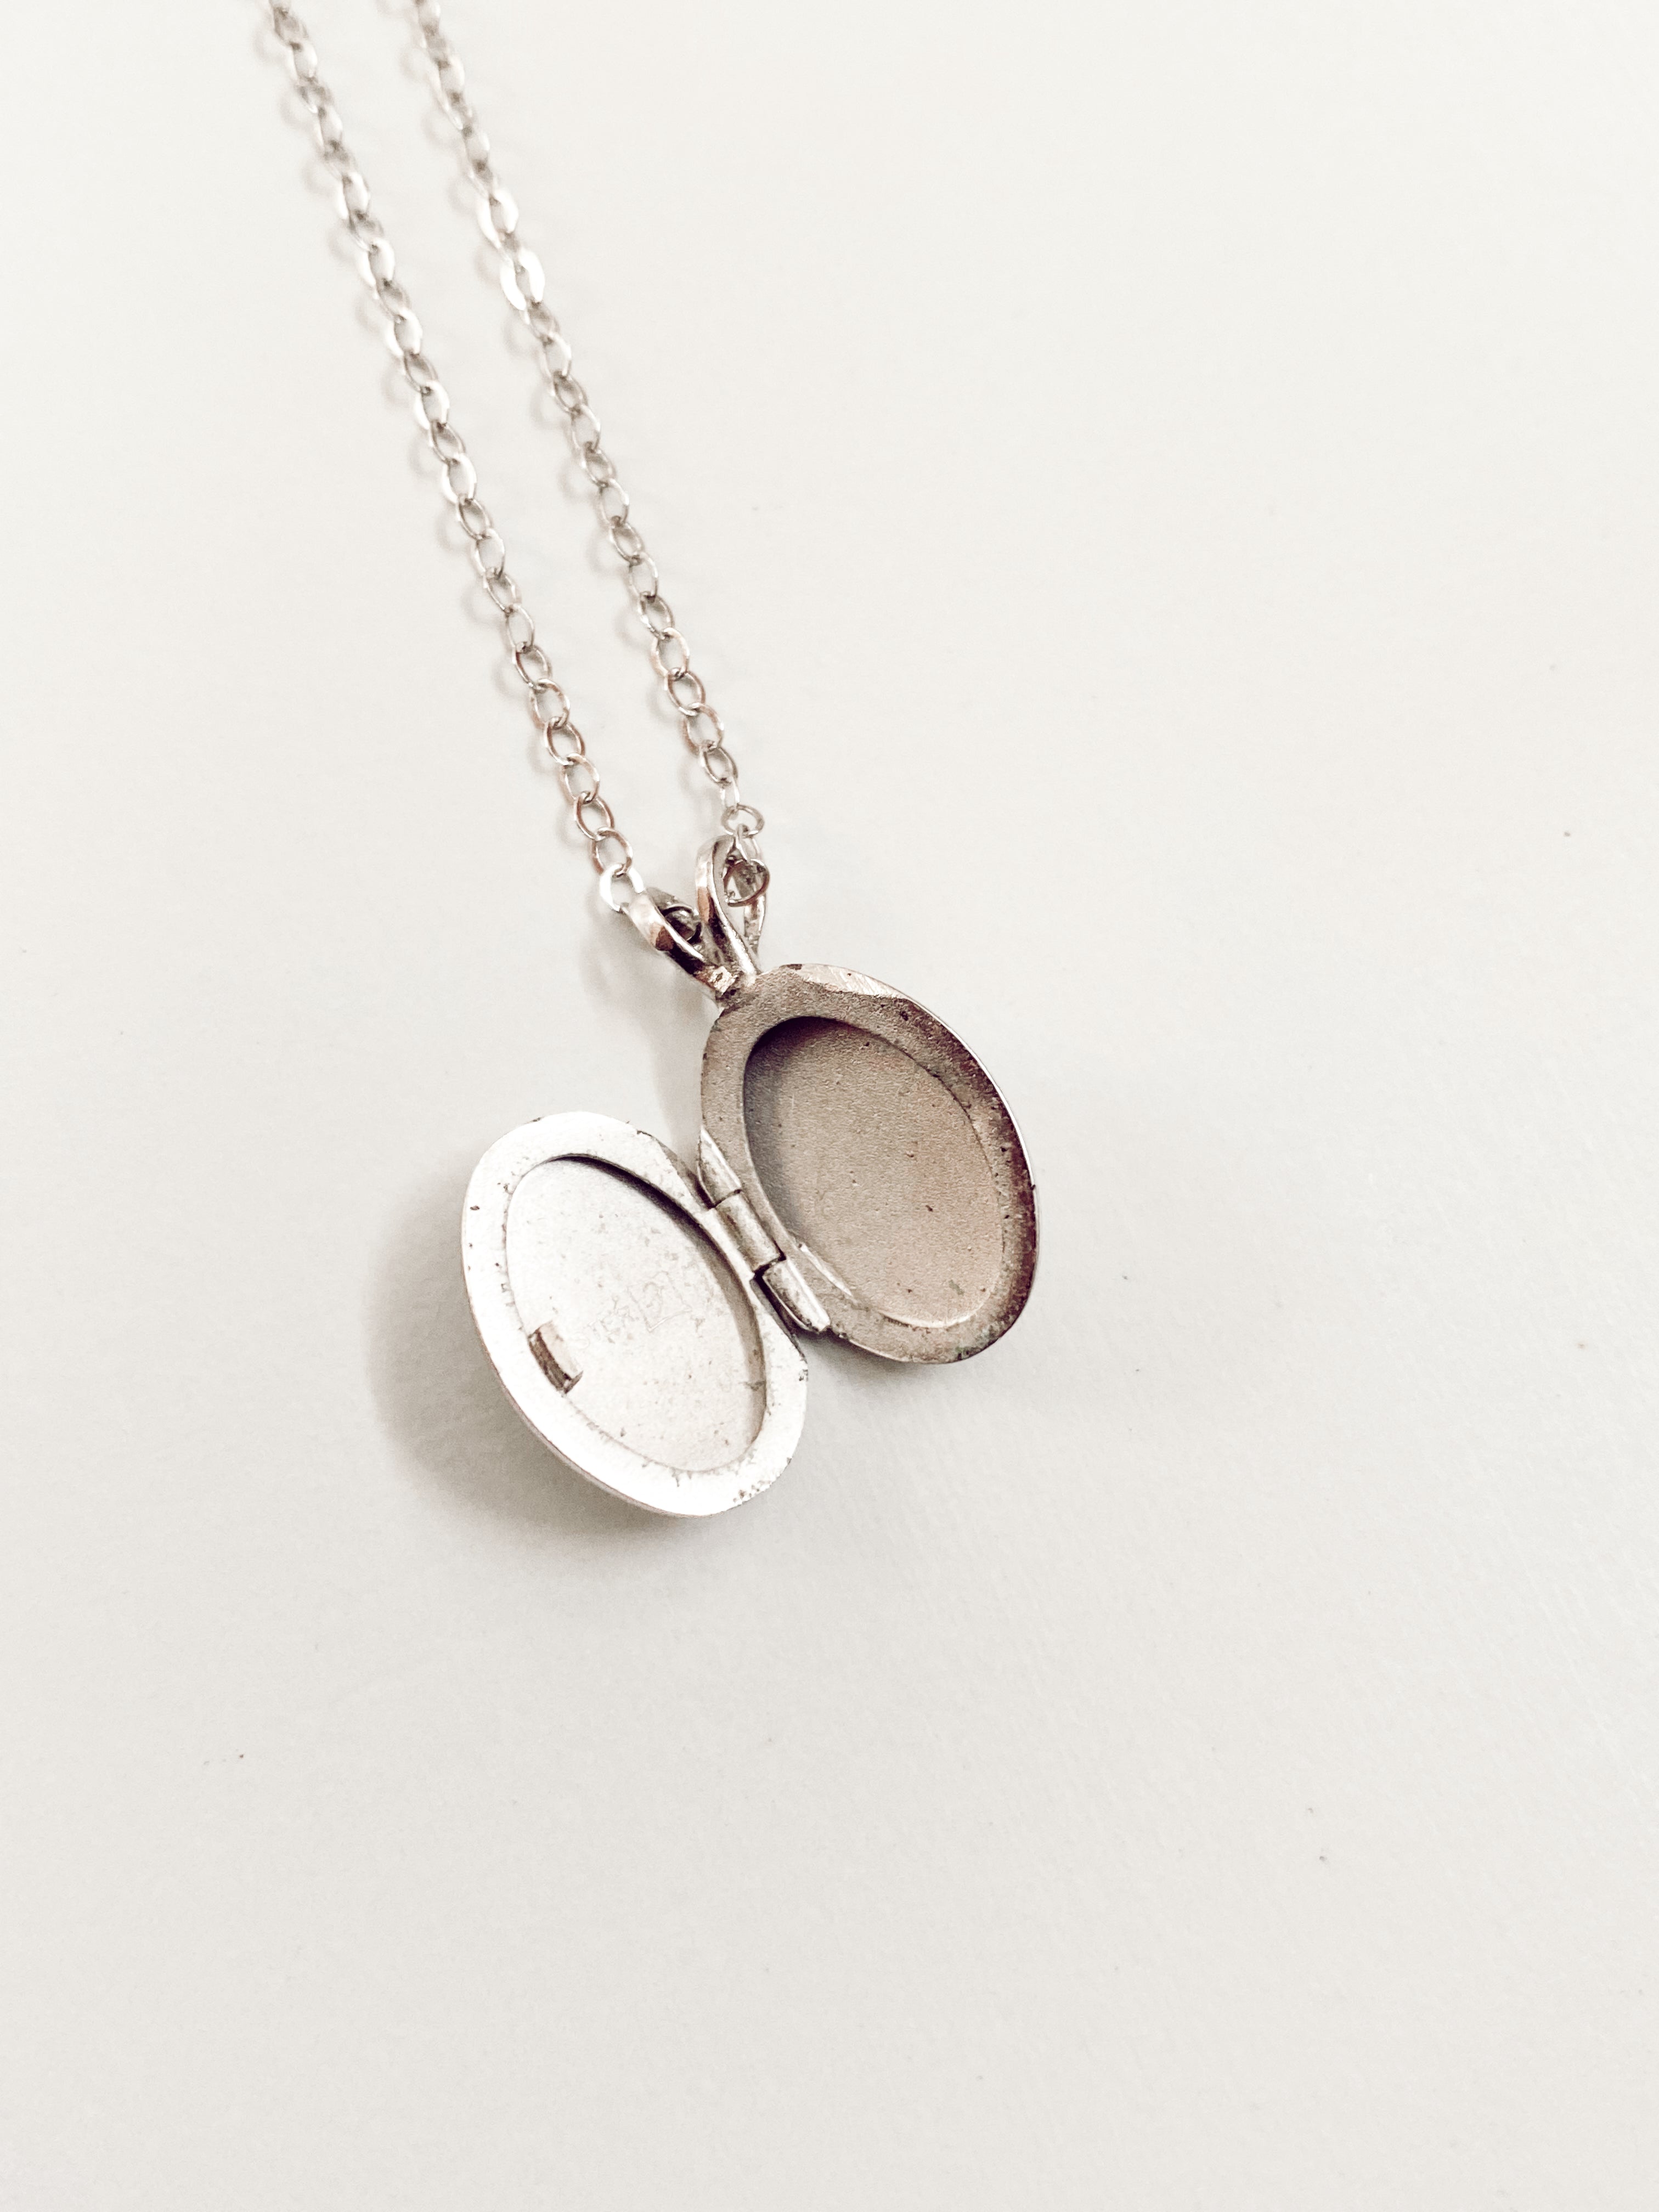 Etched Oval Micro Locket with Chain